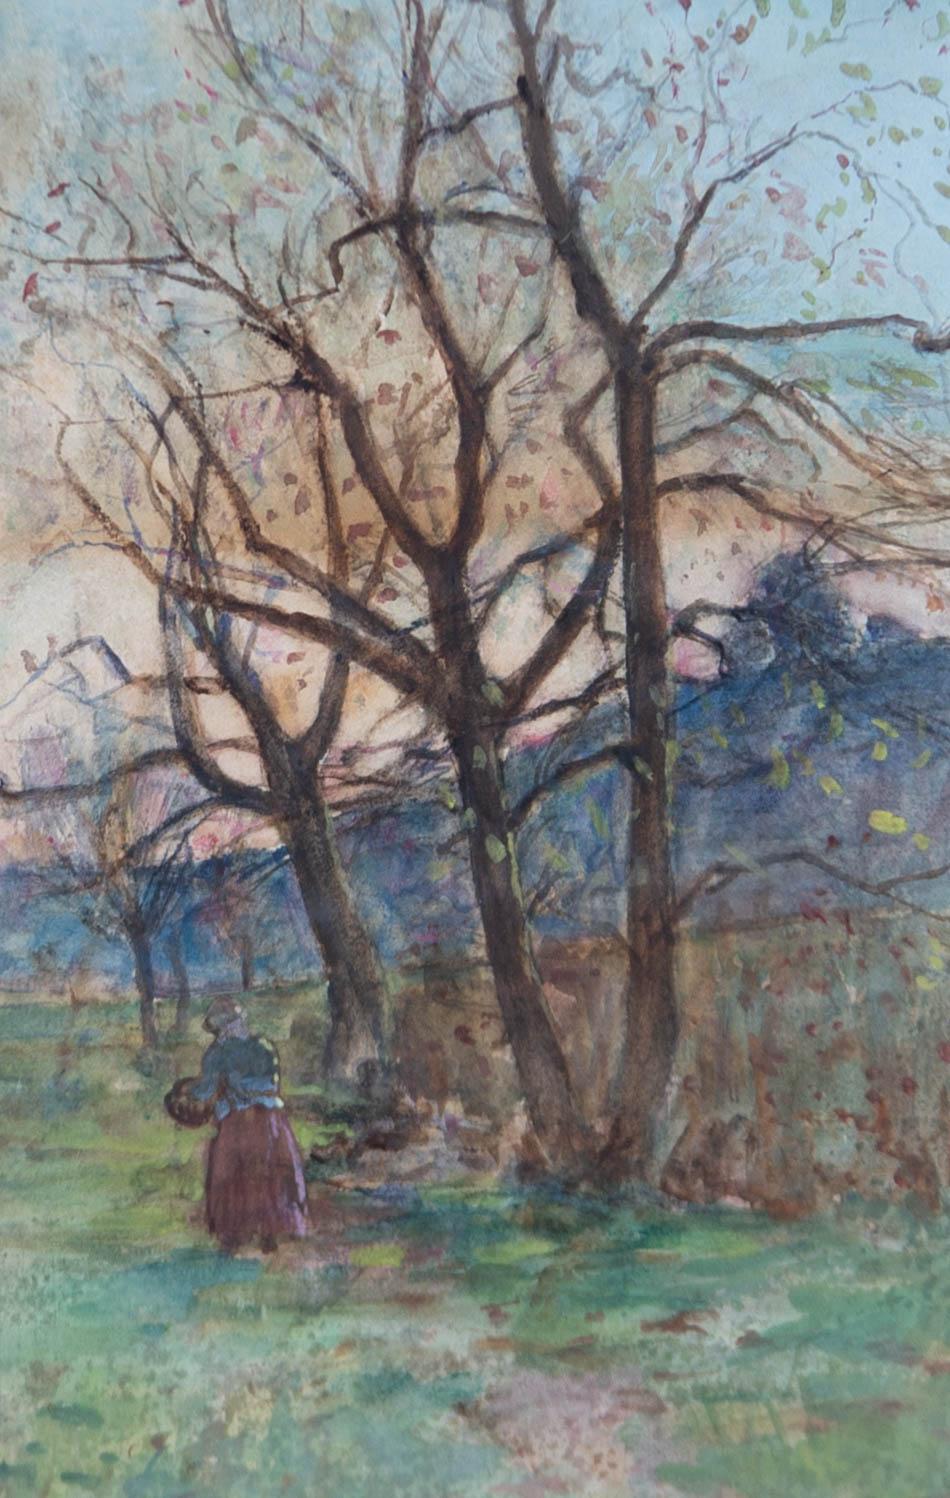 A charming watercolour painting with gouache details by the British artist Alexander Wellwood Rattray. The scene depicts a female figure holding a small basket, walking along a rural path. This well-balanced composition is illustrative of the